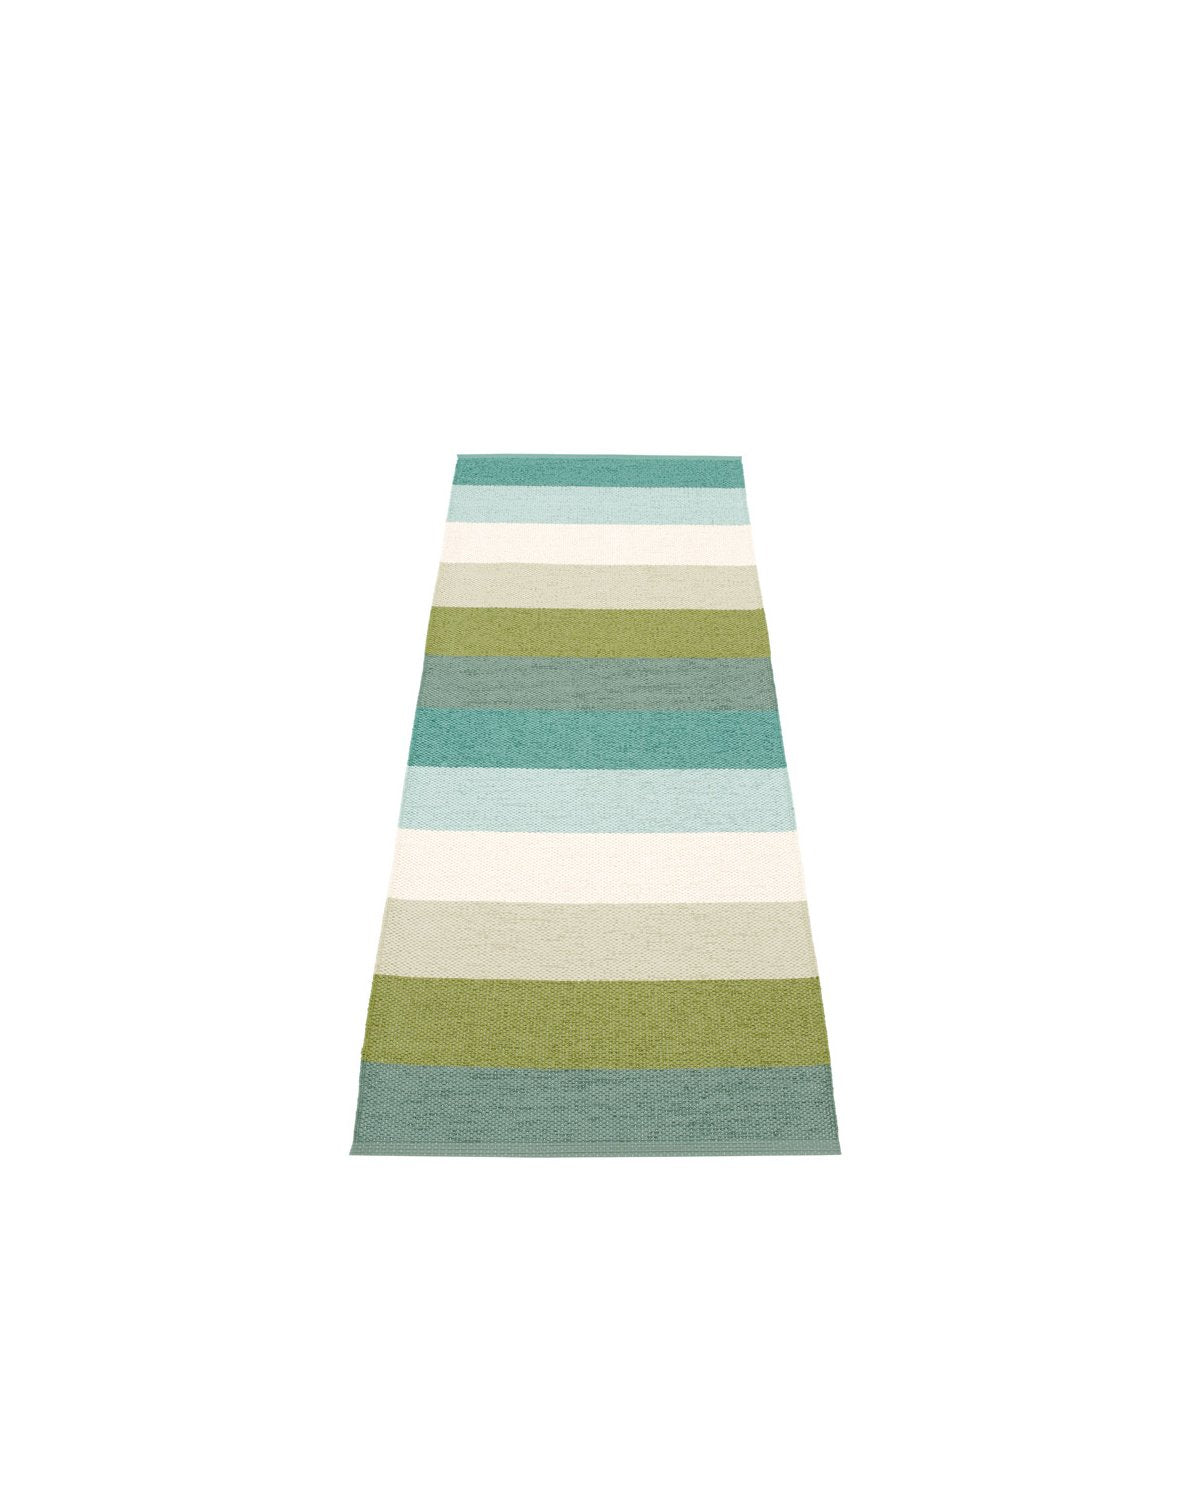 Pappelina Rug Molly Forest